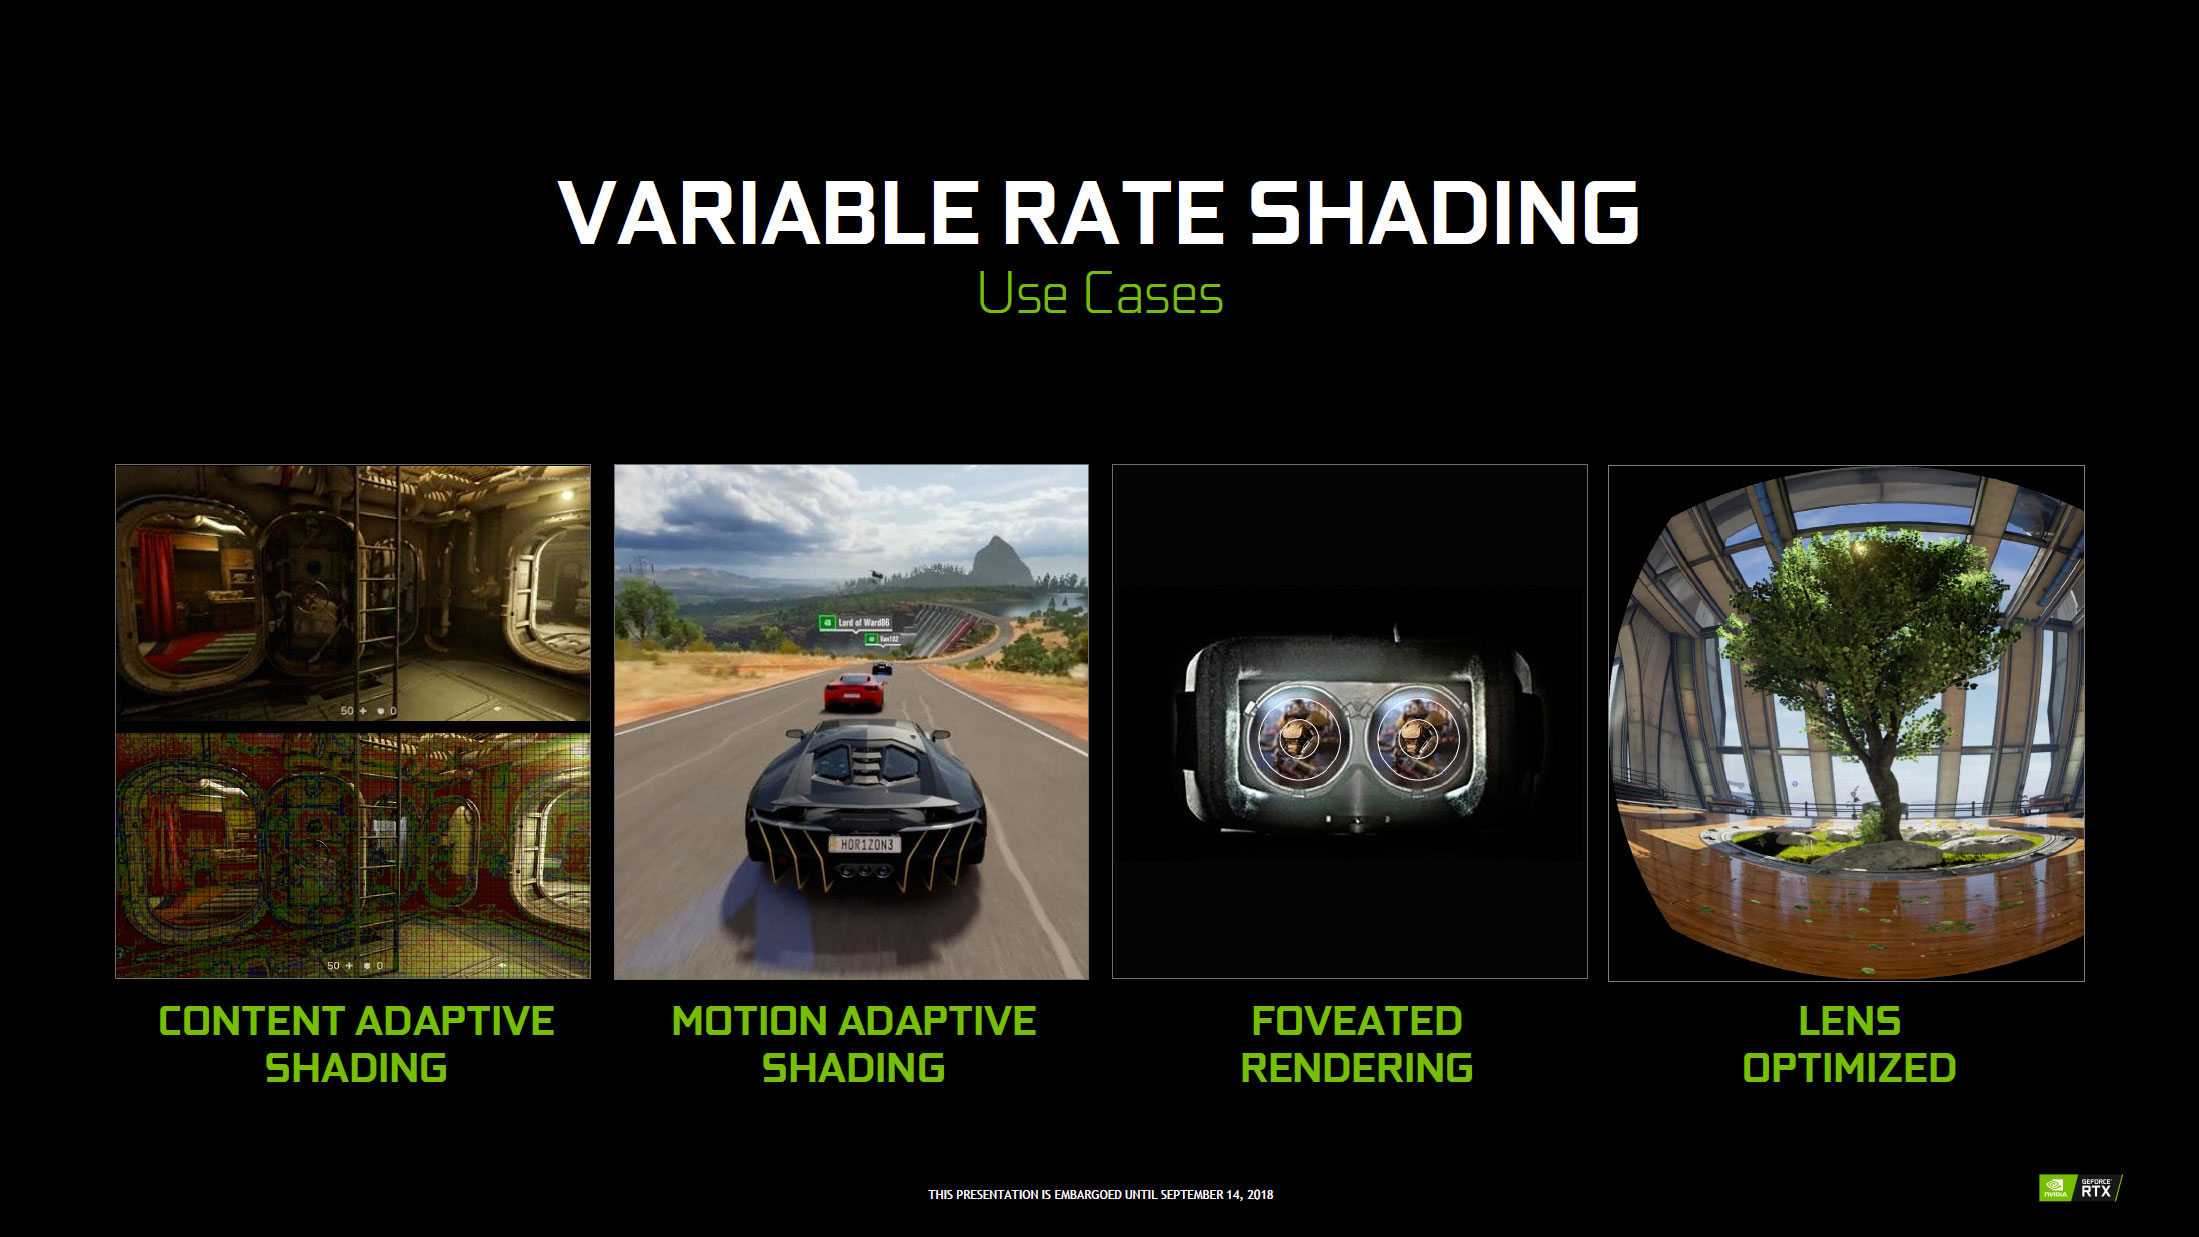 Usage variable rate shading